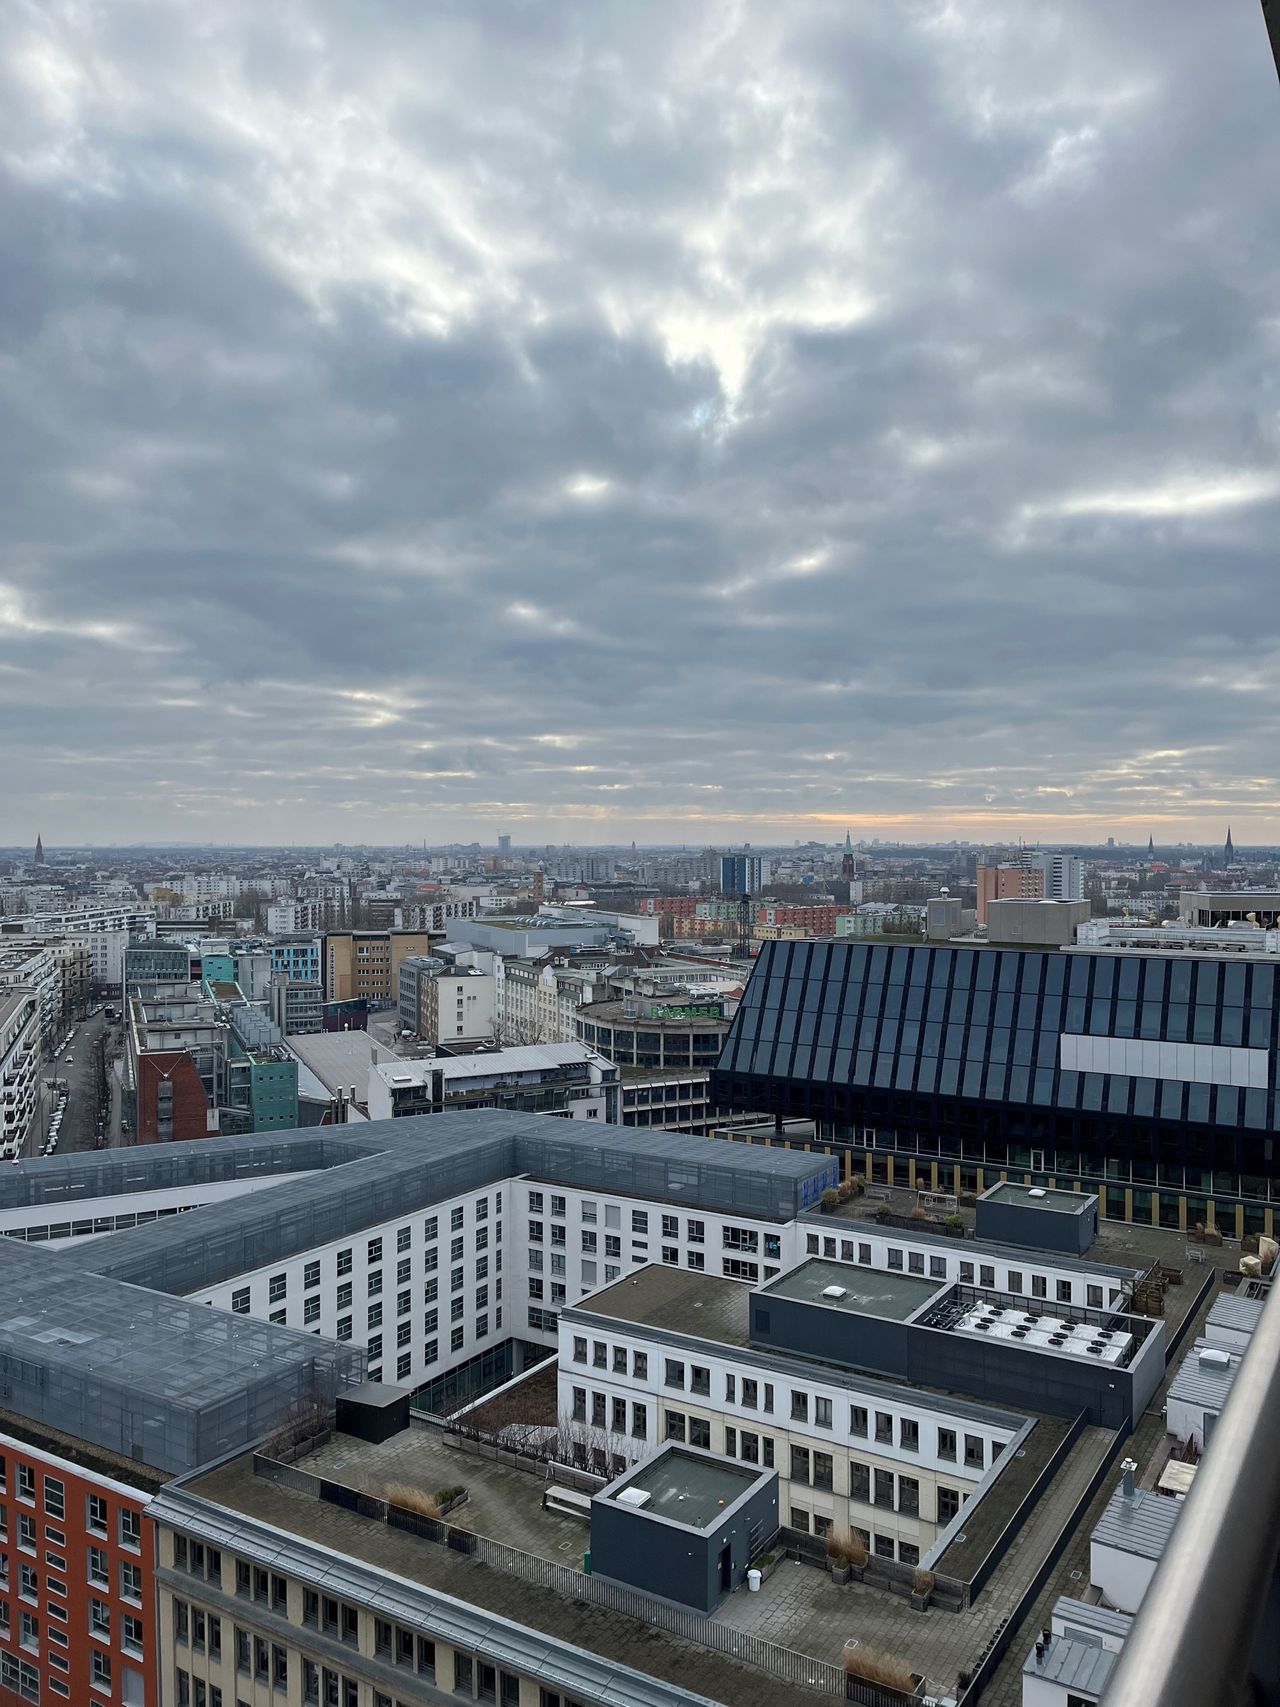 51m² | 2 rooms in the heart of Berlin with amazing view